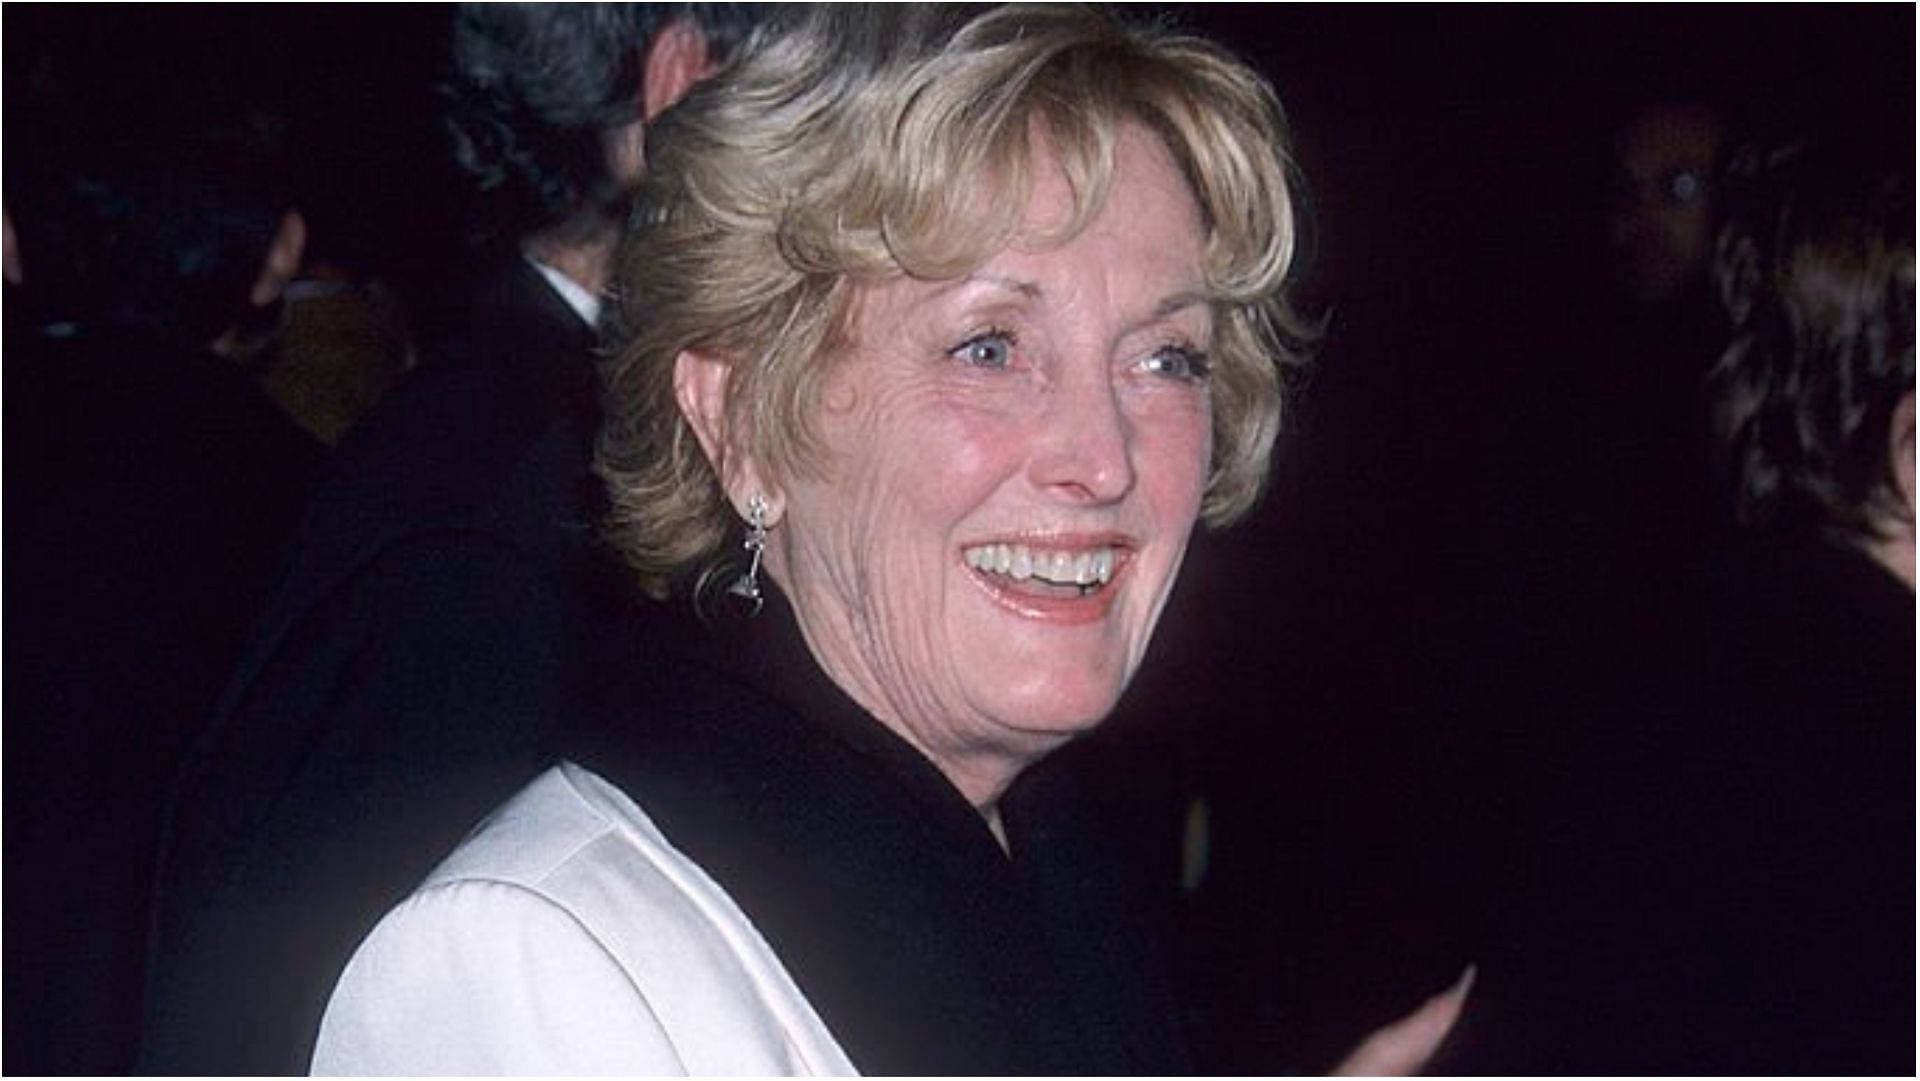 Eileen Ryan appeared in many movies and TV shows (Image via Ron Gallela, Ltd/Getty Images)